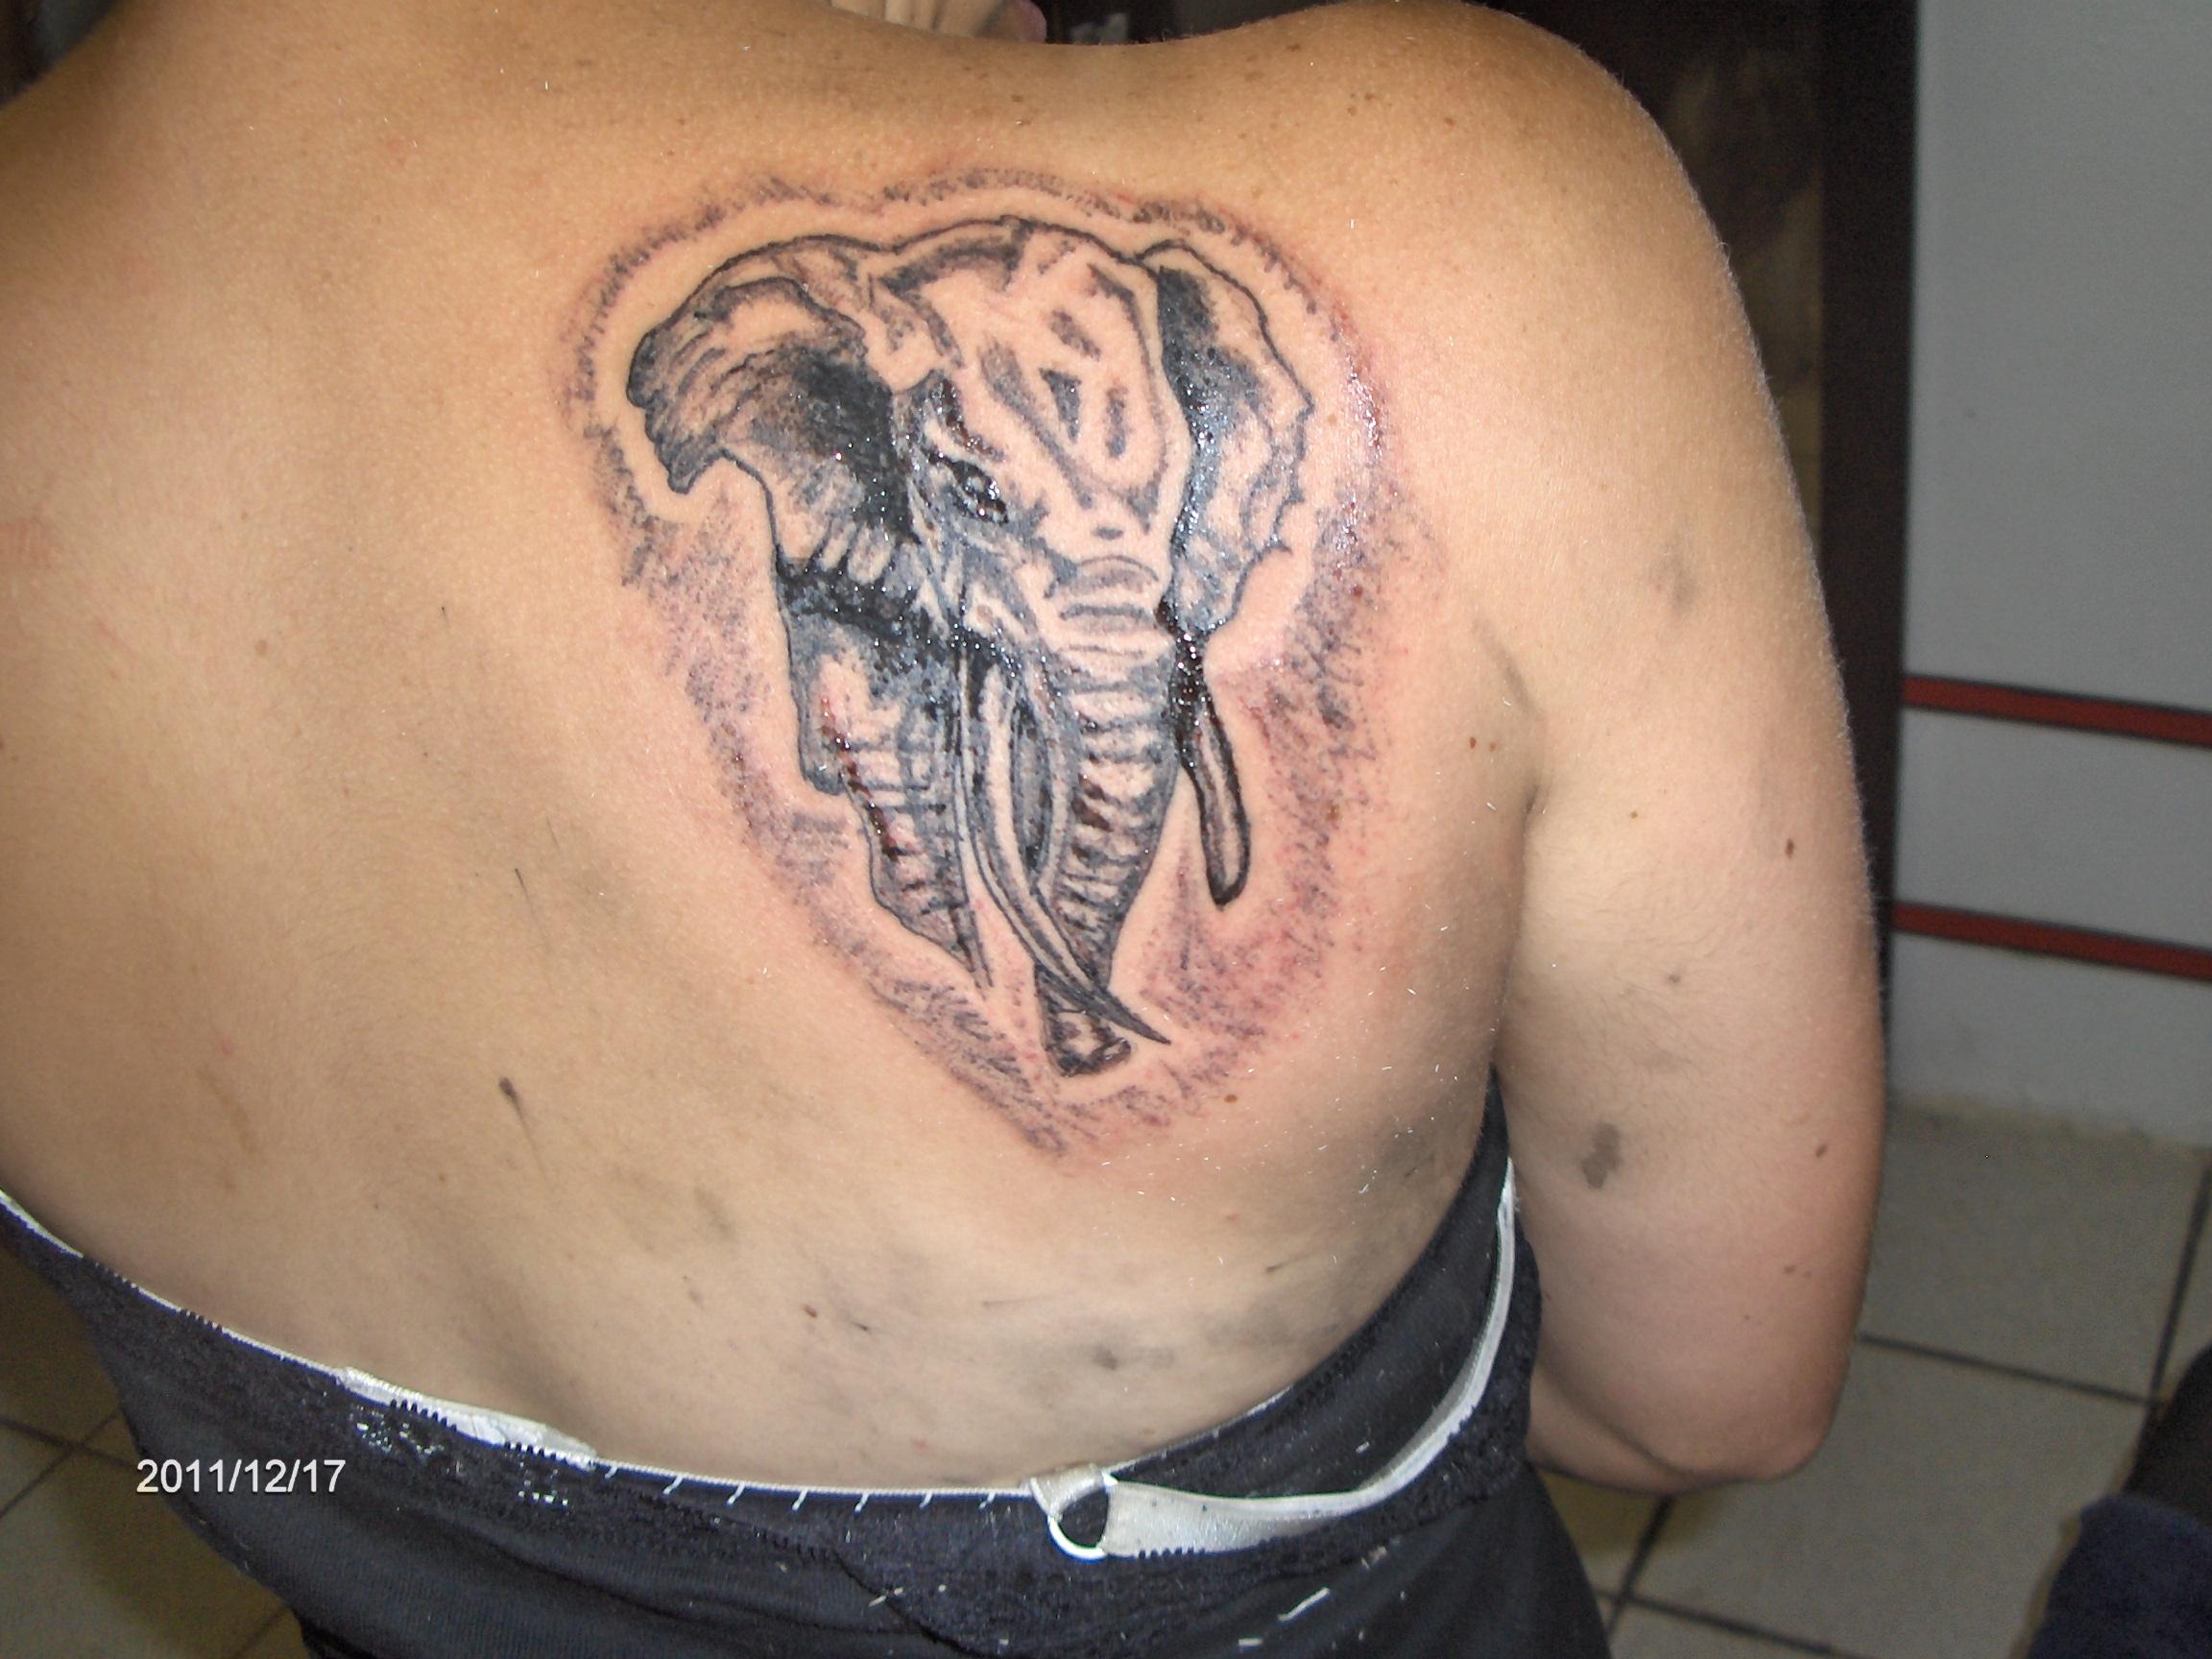 Elephant Tattoos Designs, Ideas and Meaning | Tattoos For You